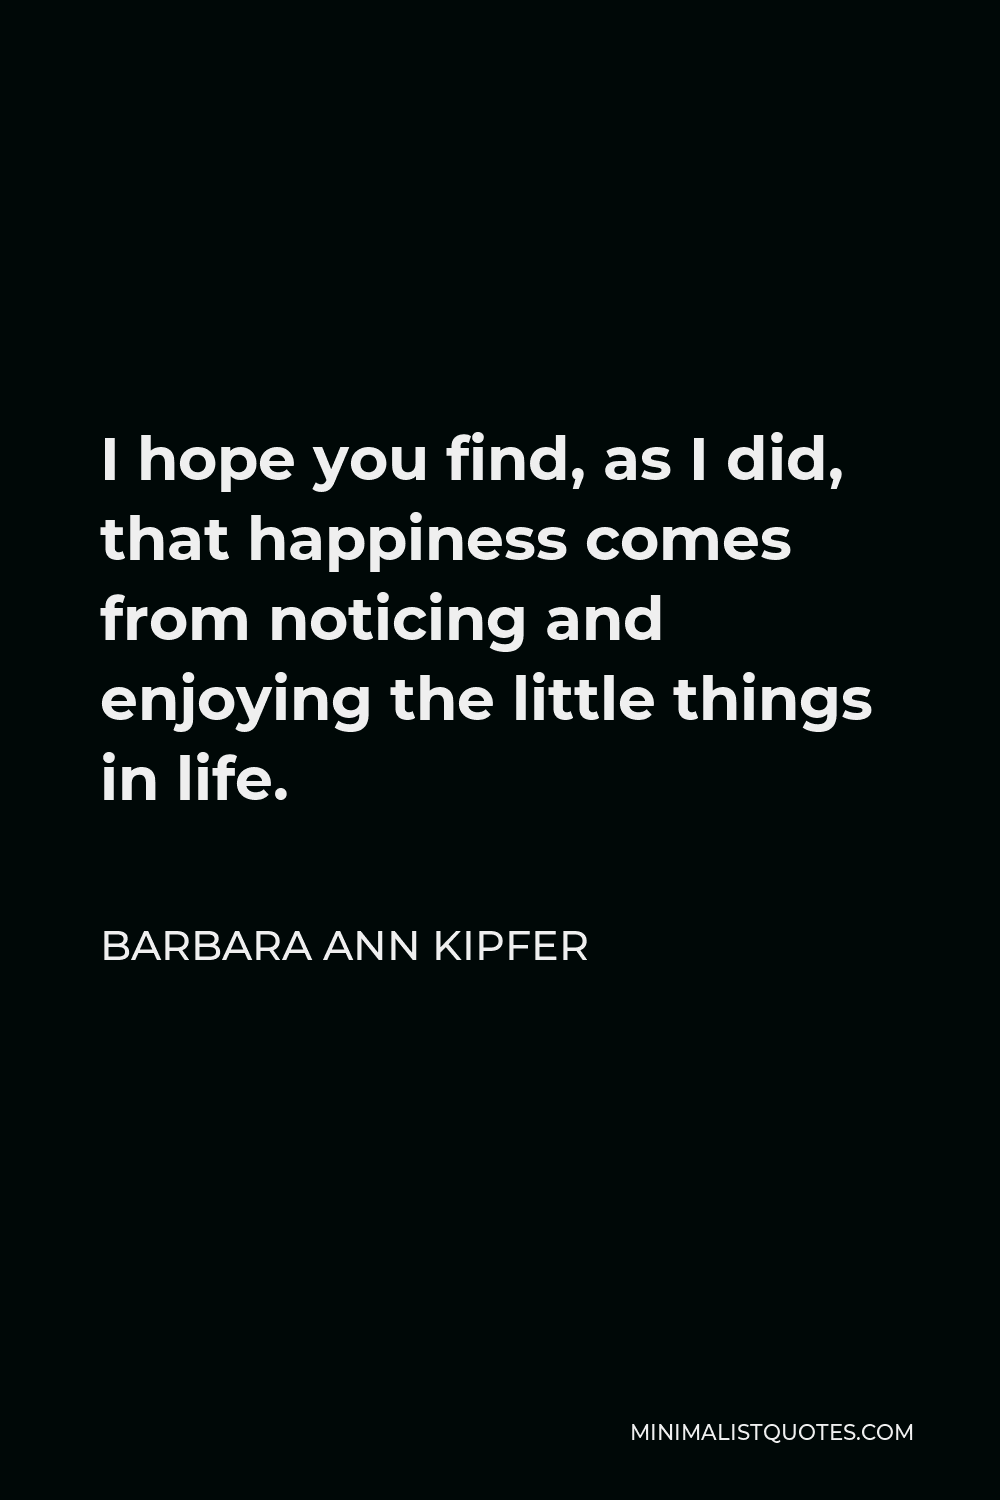 Barbara Ann Kipfer Quote - I hope you find, as I did, that happiness comes from noticing and enjoying the little things in life.